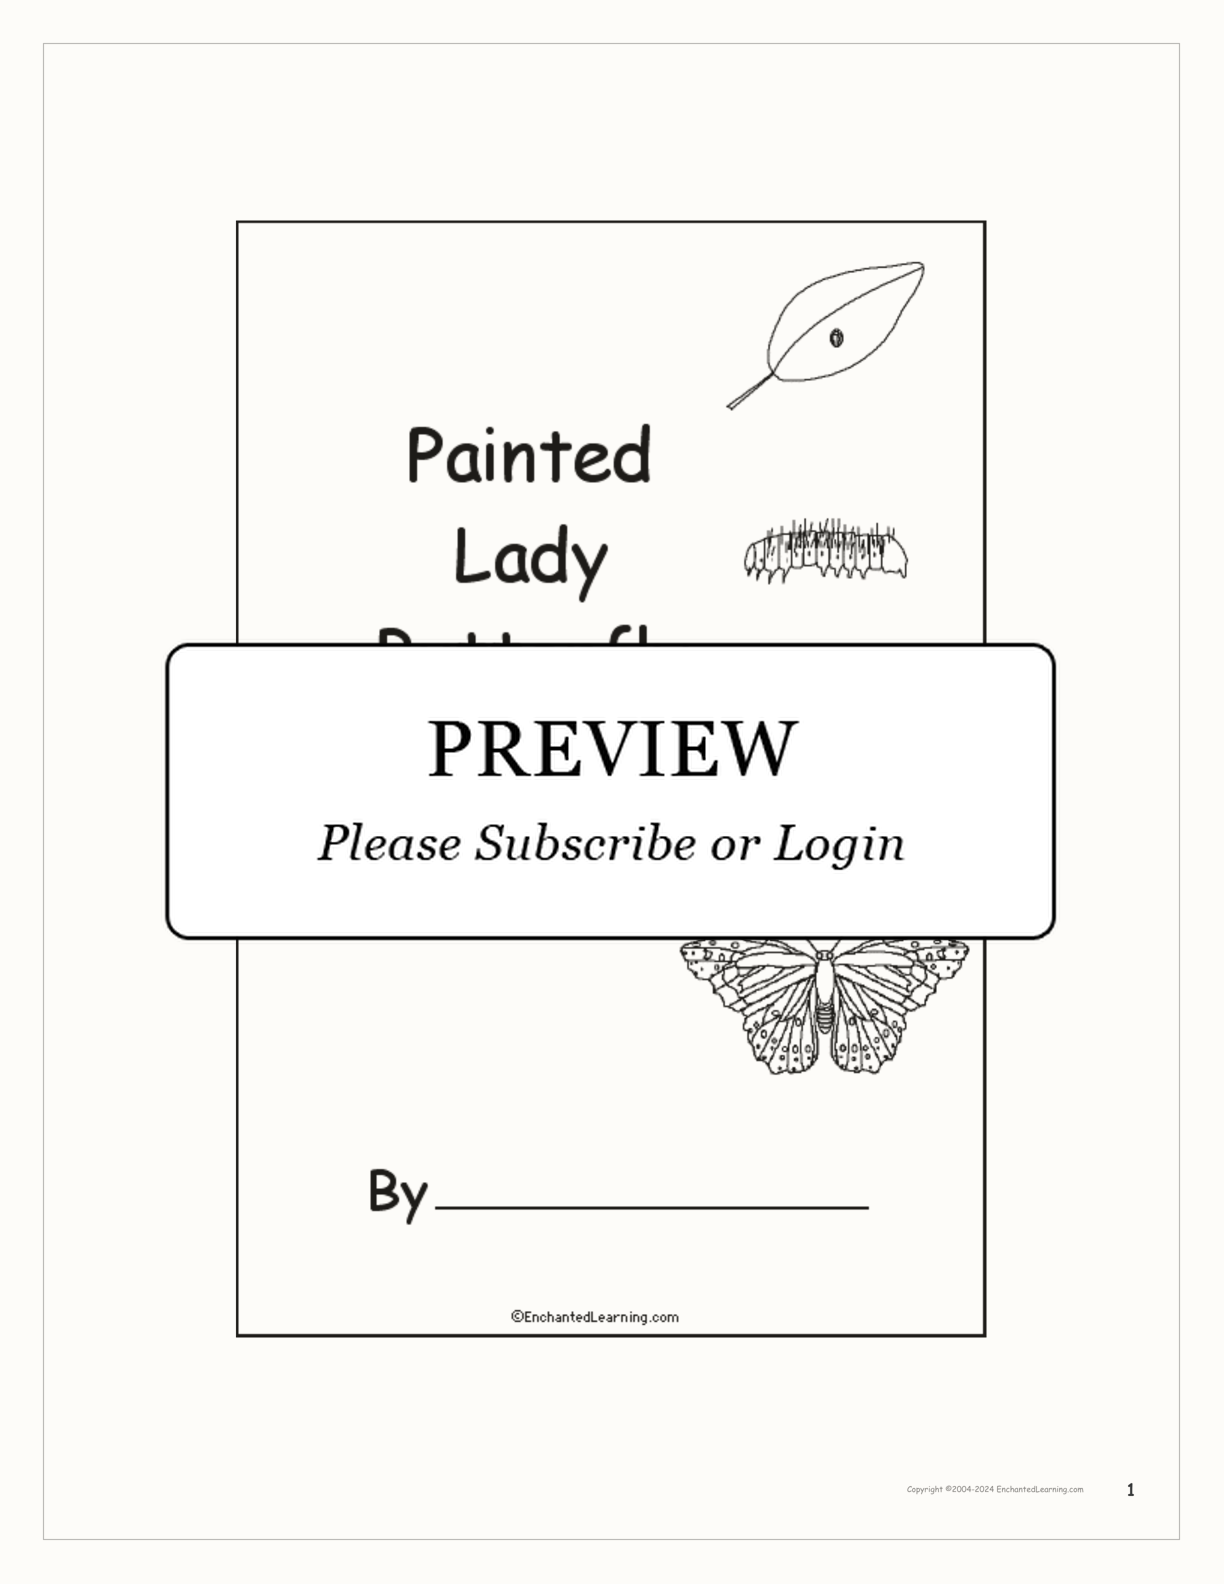 Painted Lady Butterfly Book interactive printout page 1